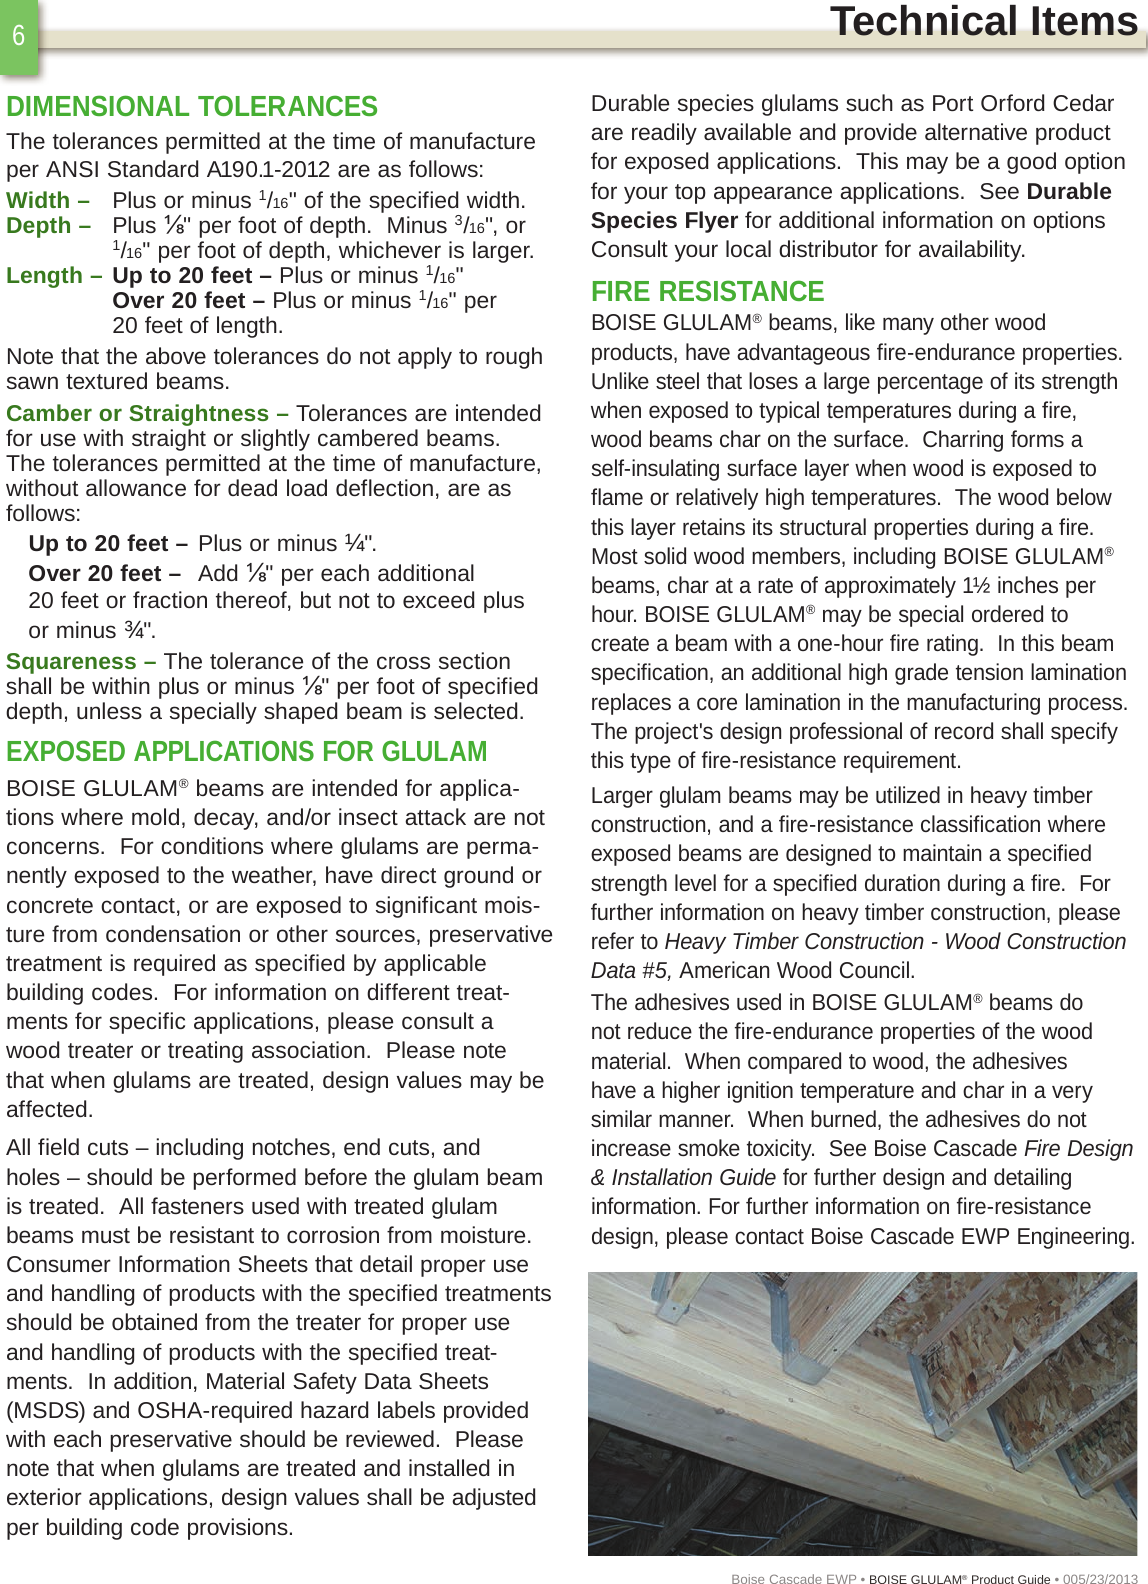 Page 6 of 12 - Boise Glulam Product Guide